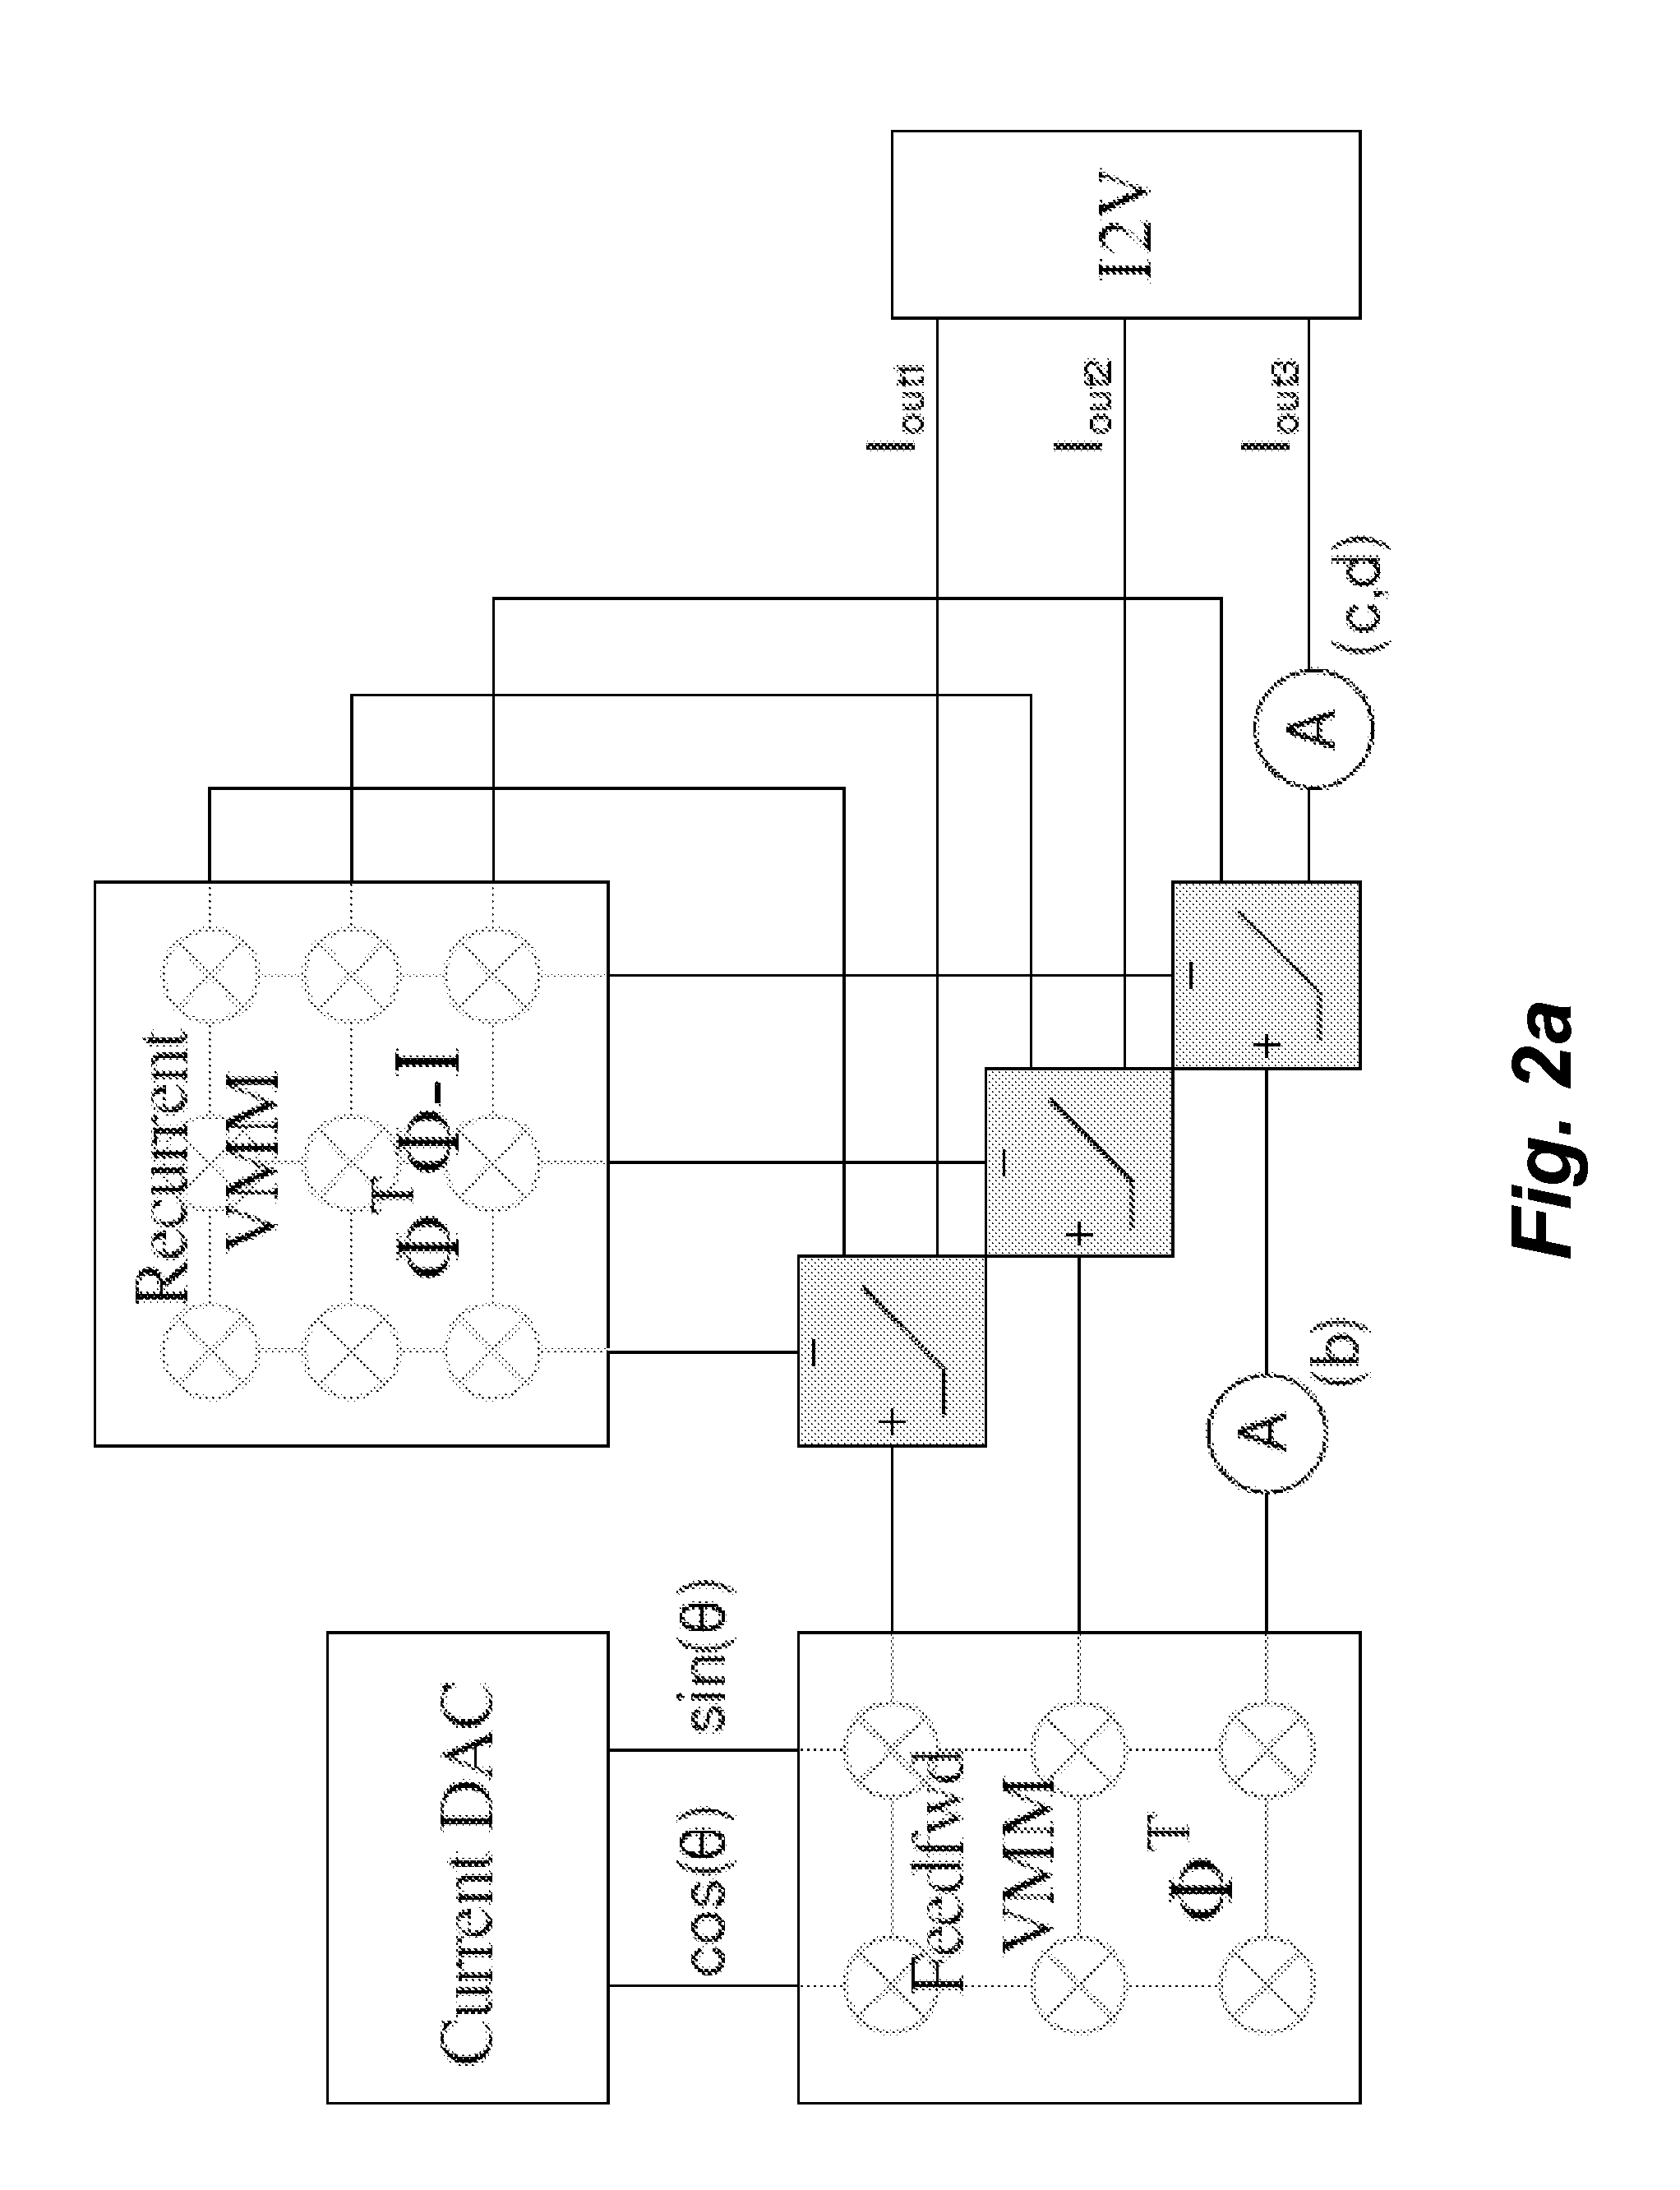 Analog programmable sparse approximation system